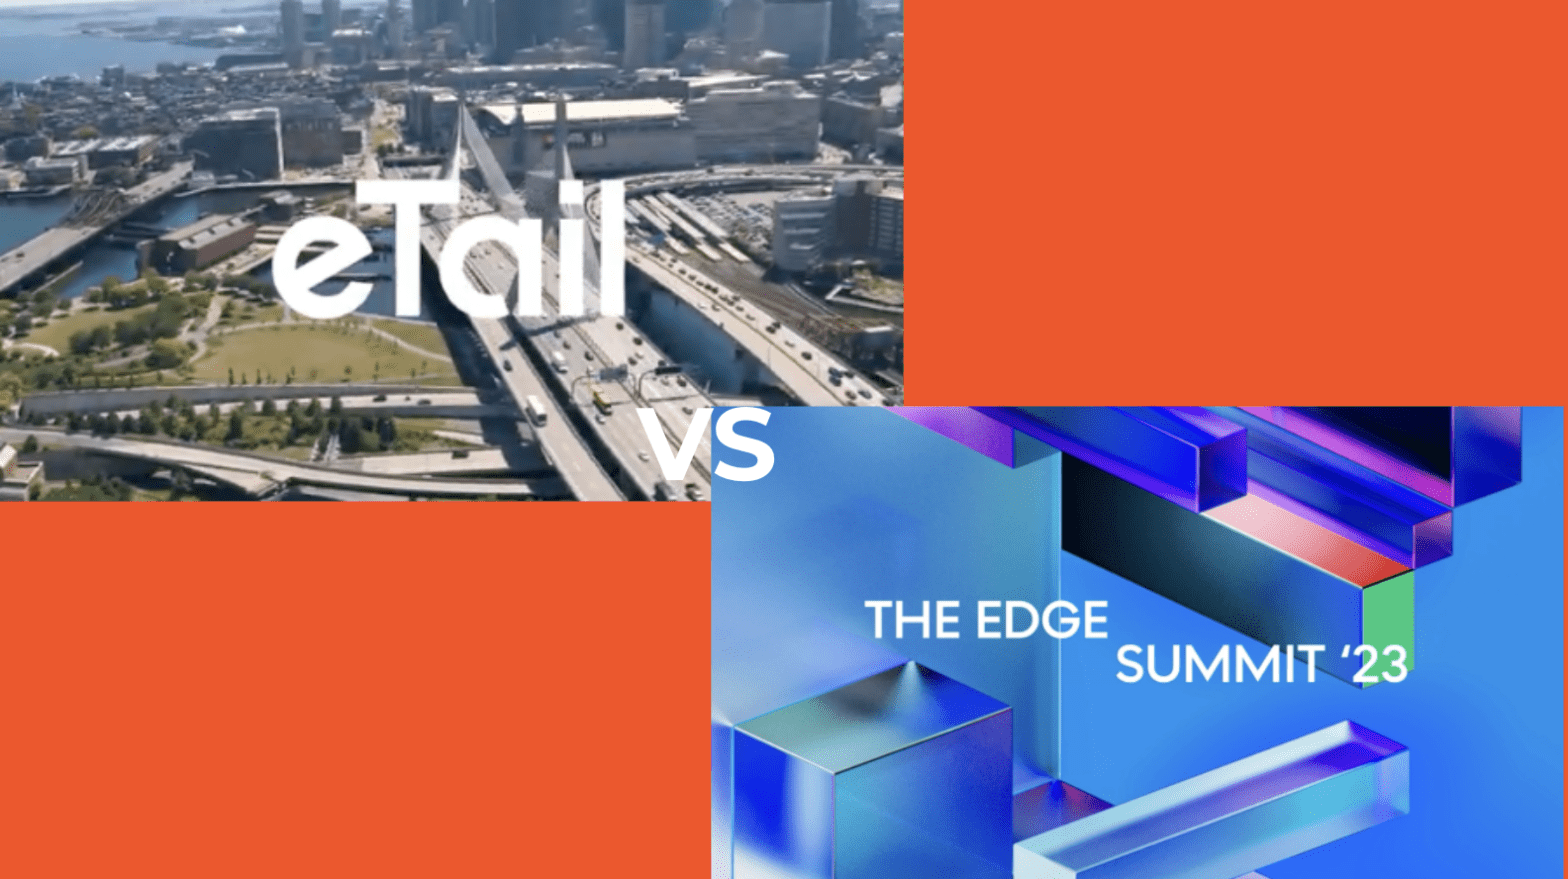 our top takeaways from eTail and Edge Summit